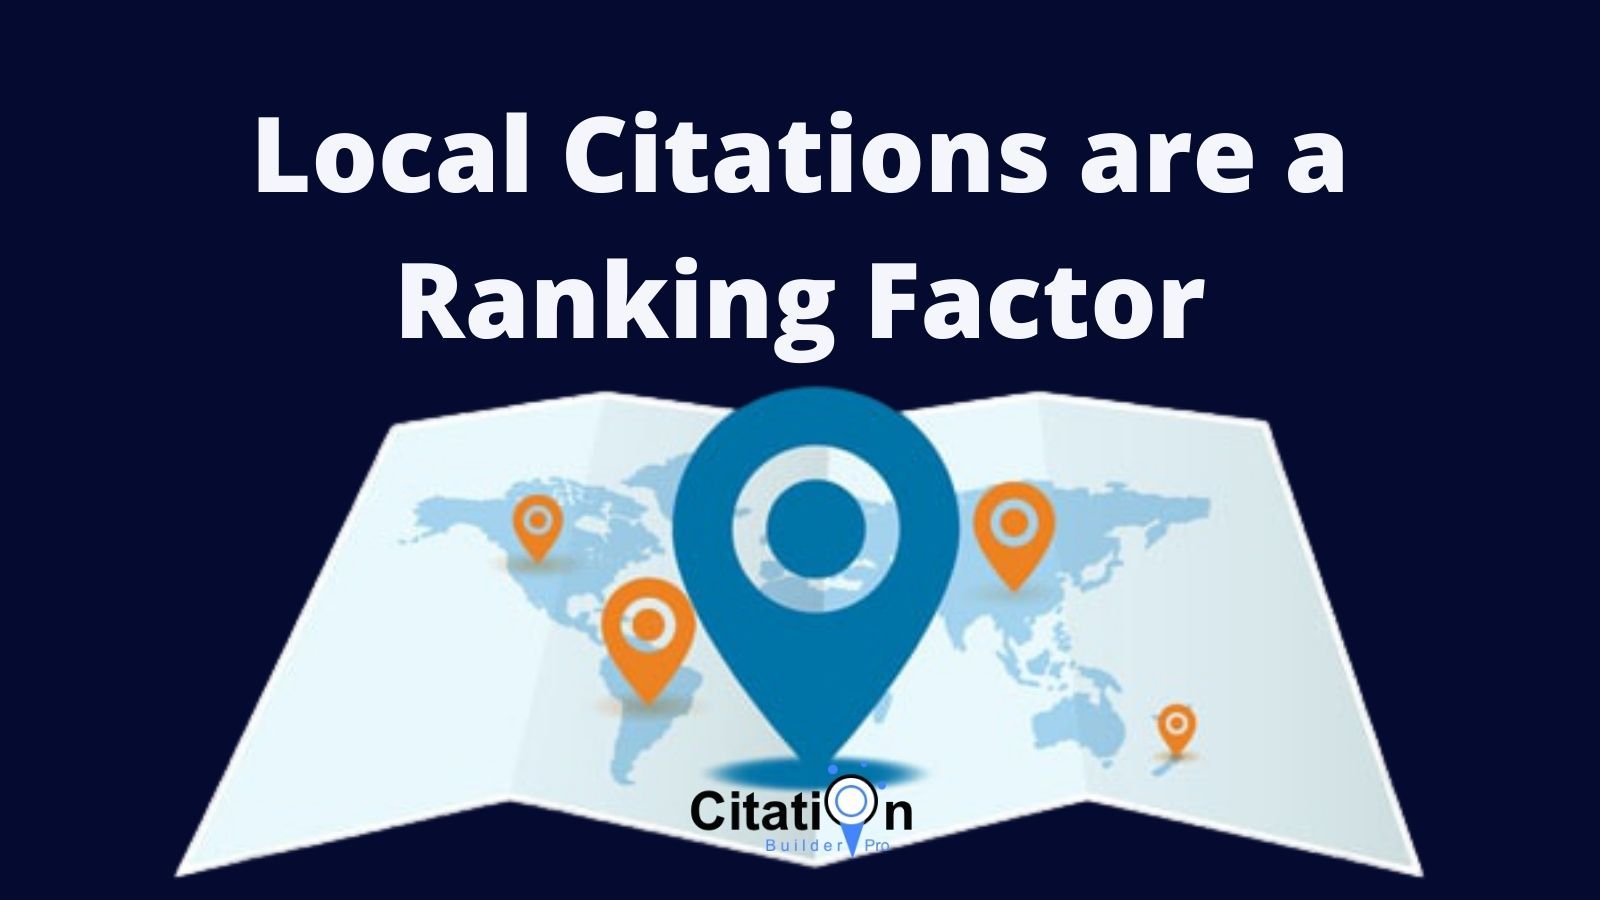 Local citations are a ranking factor